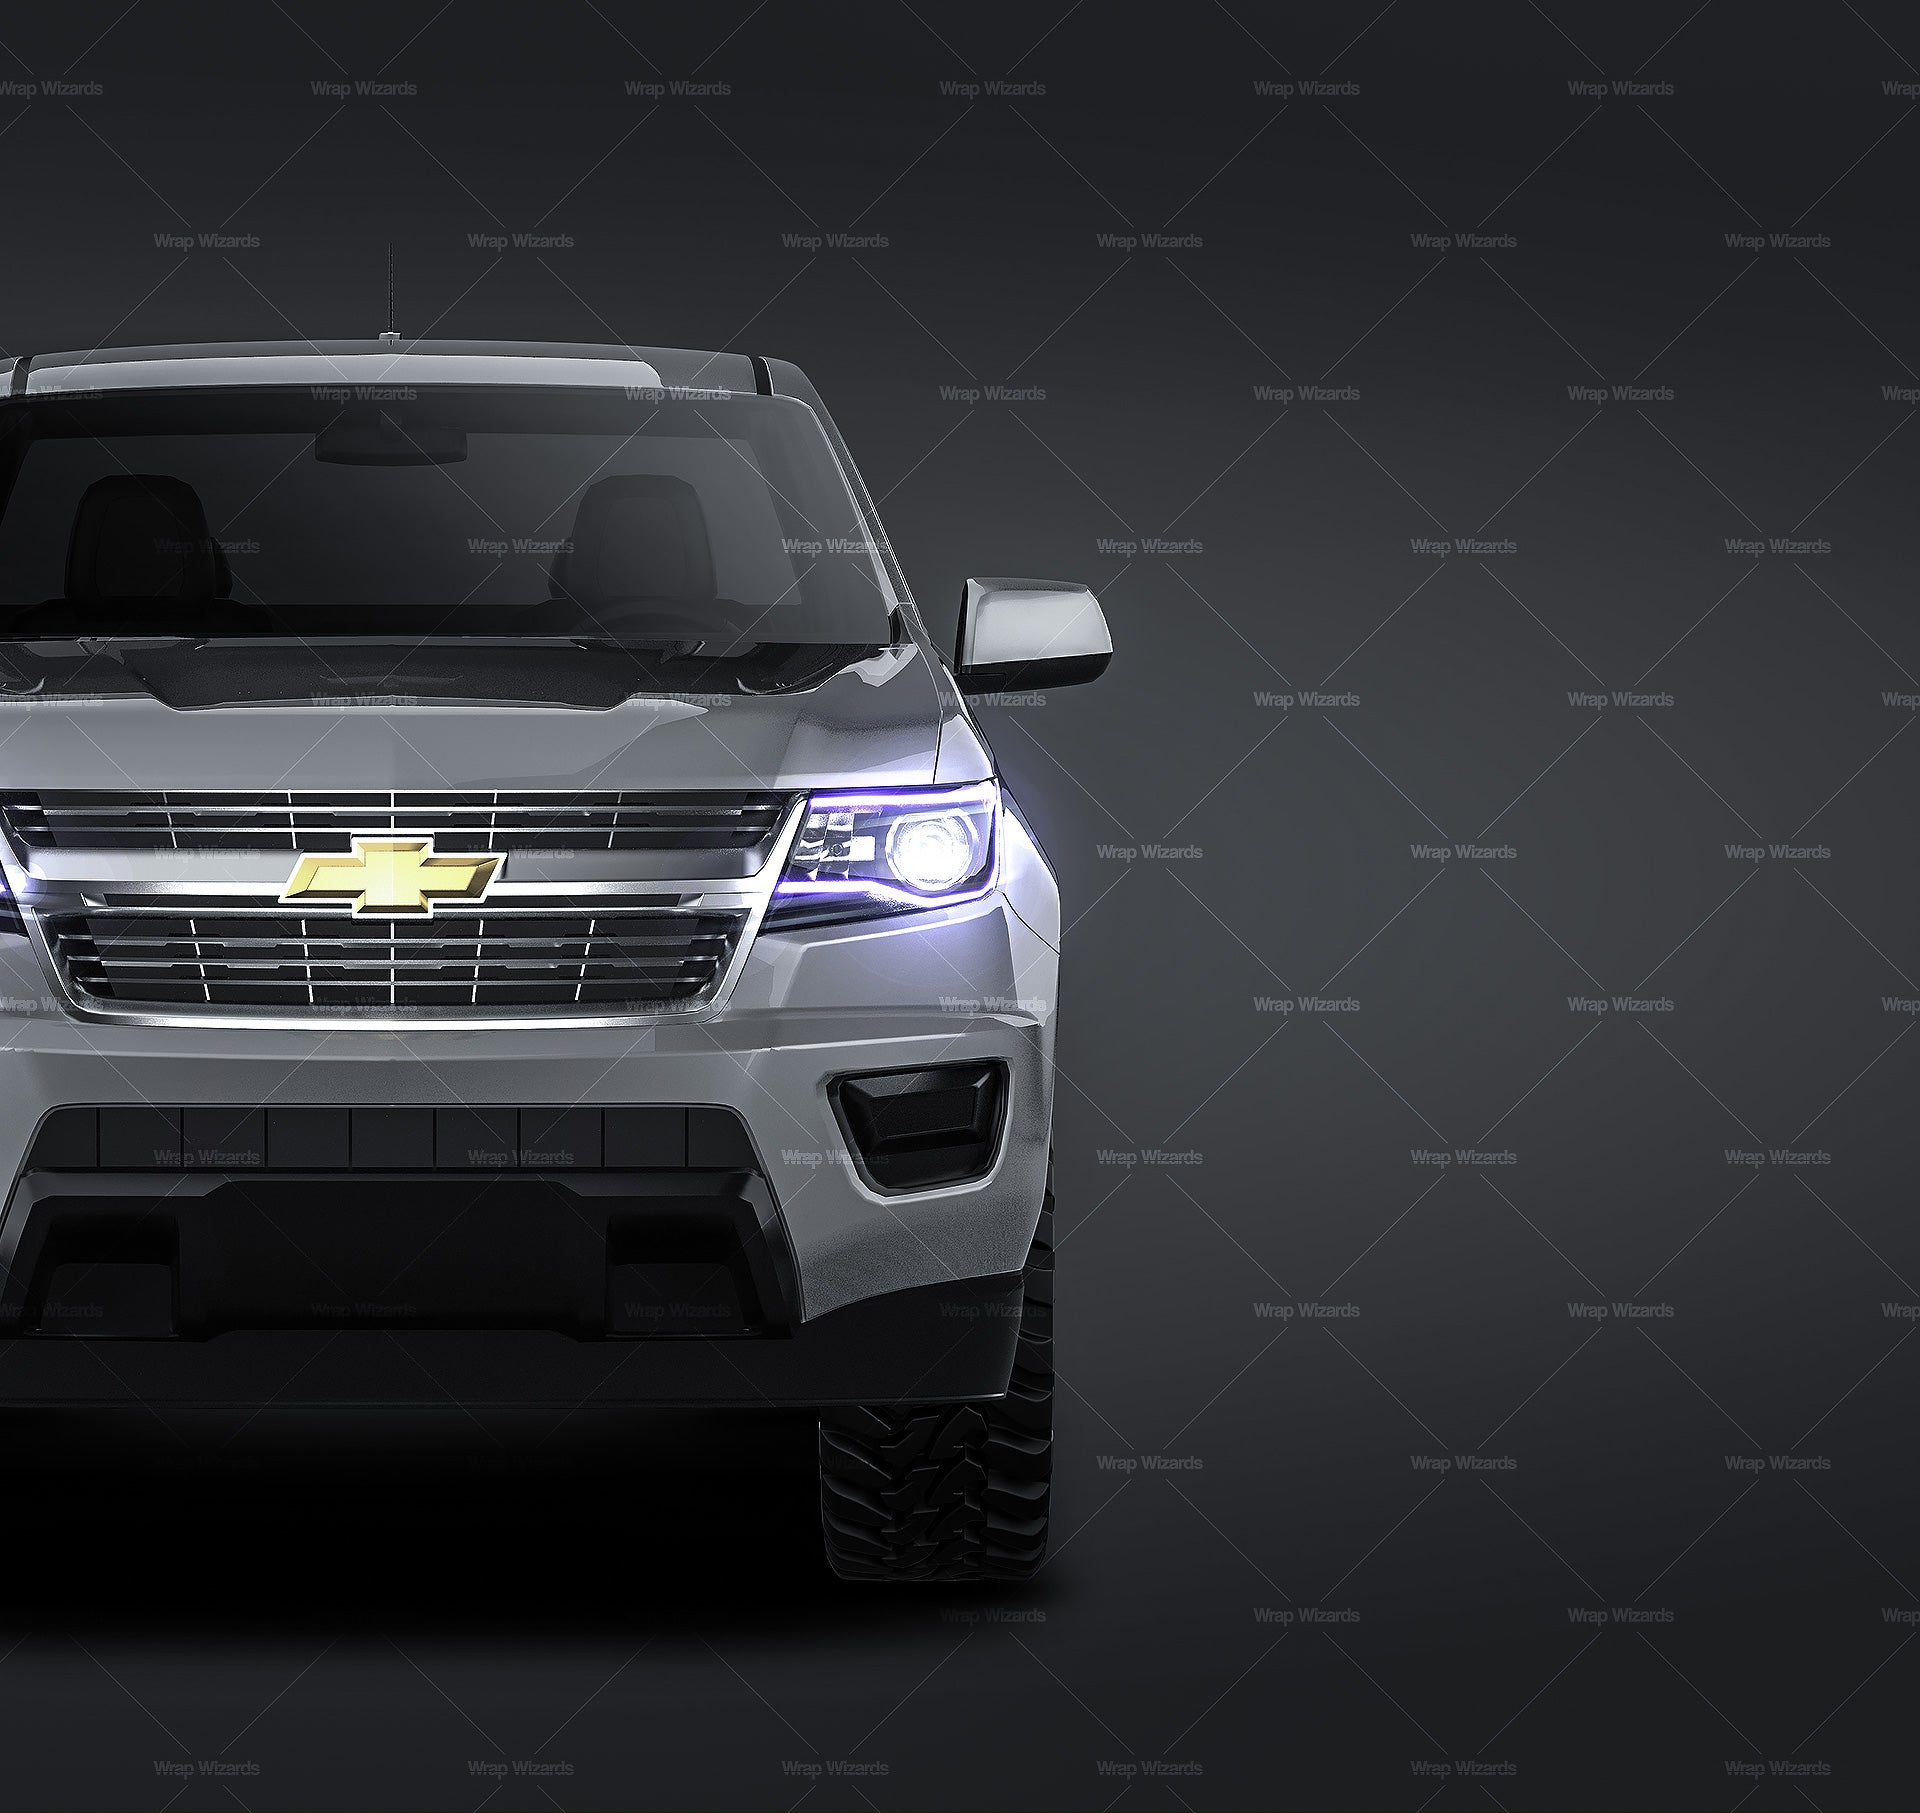 Chevrolet Colorado 2018 extended cab glossy finish - all sides Car Mockup Template.psd